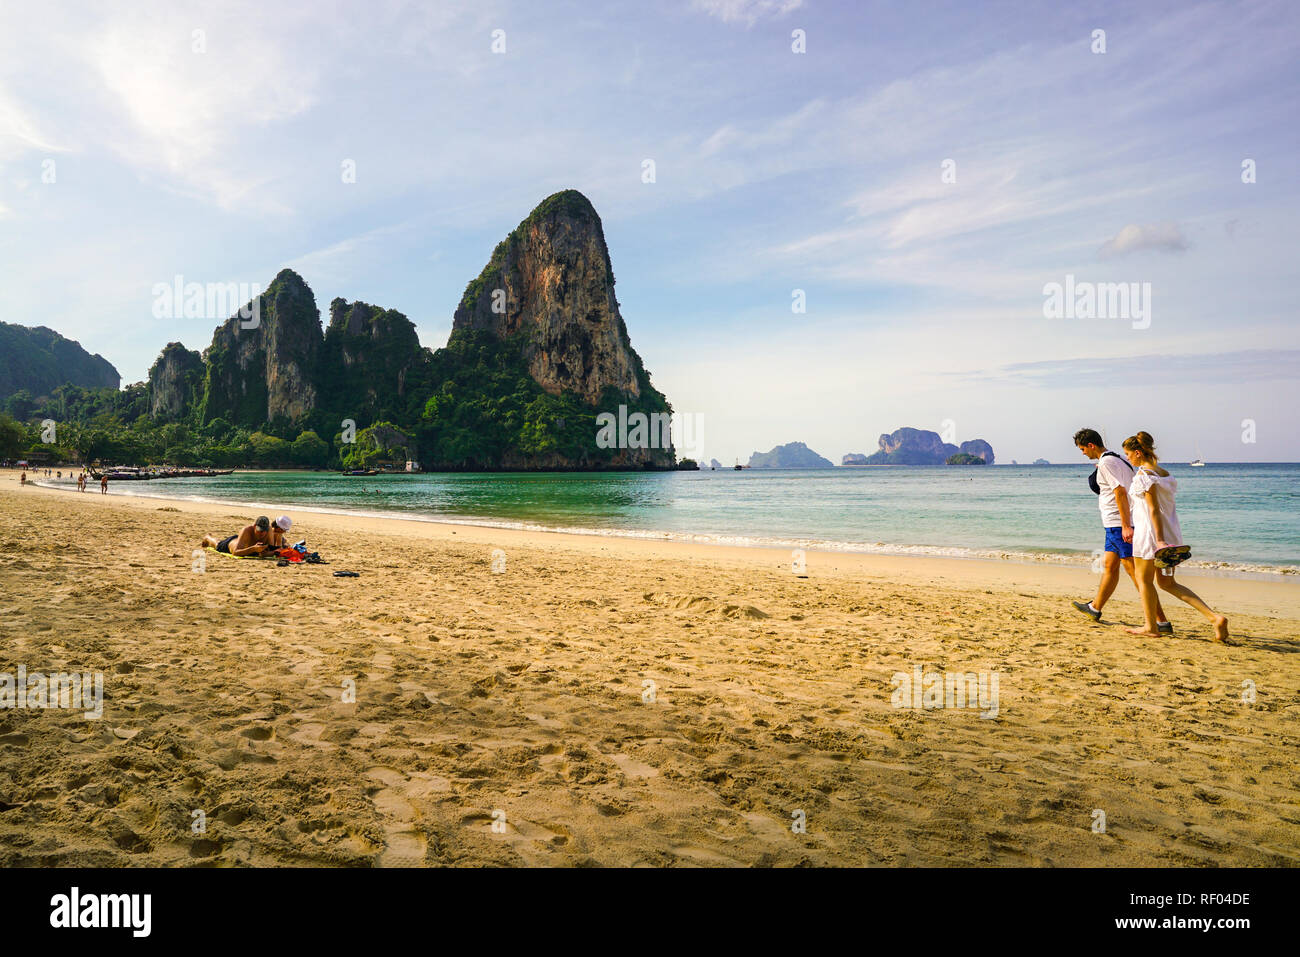 Railay Beach, Krabi, Thailand, 1st January 2019: Morning scene with long tail boats and tourists at lovely Railay beach. Stock Photo